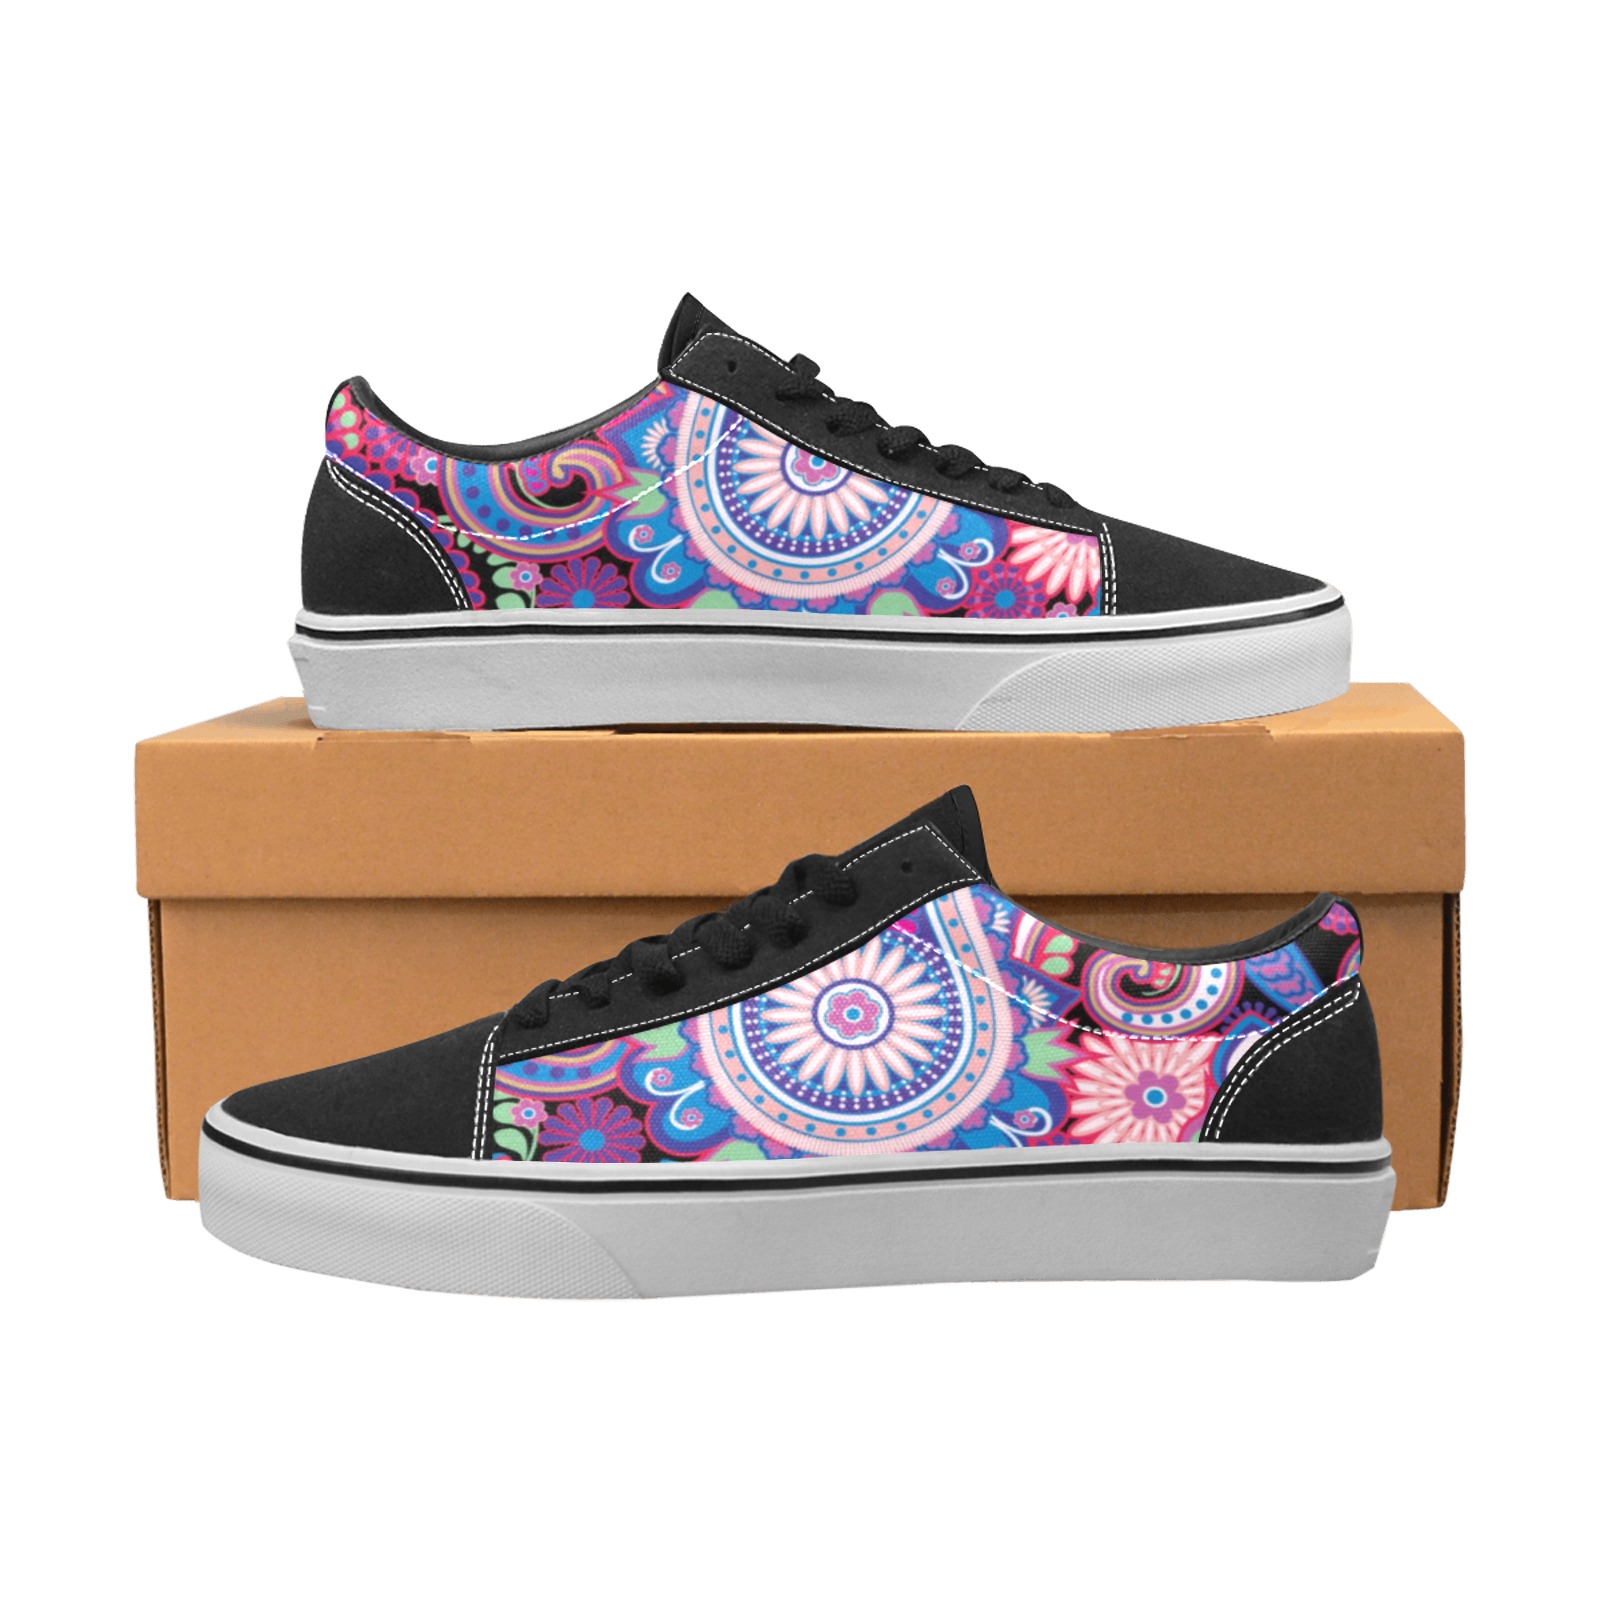 Seamless pattern based on traditional Asian elements Paisley_107916152.jpg Men's Low Top Skateboarding Shoes (Model E001-2)